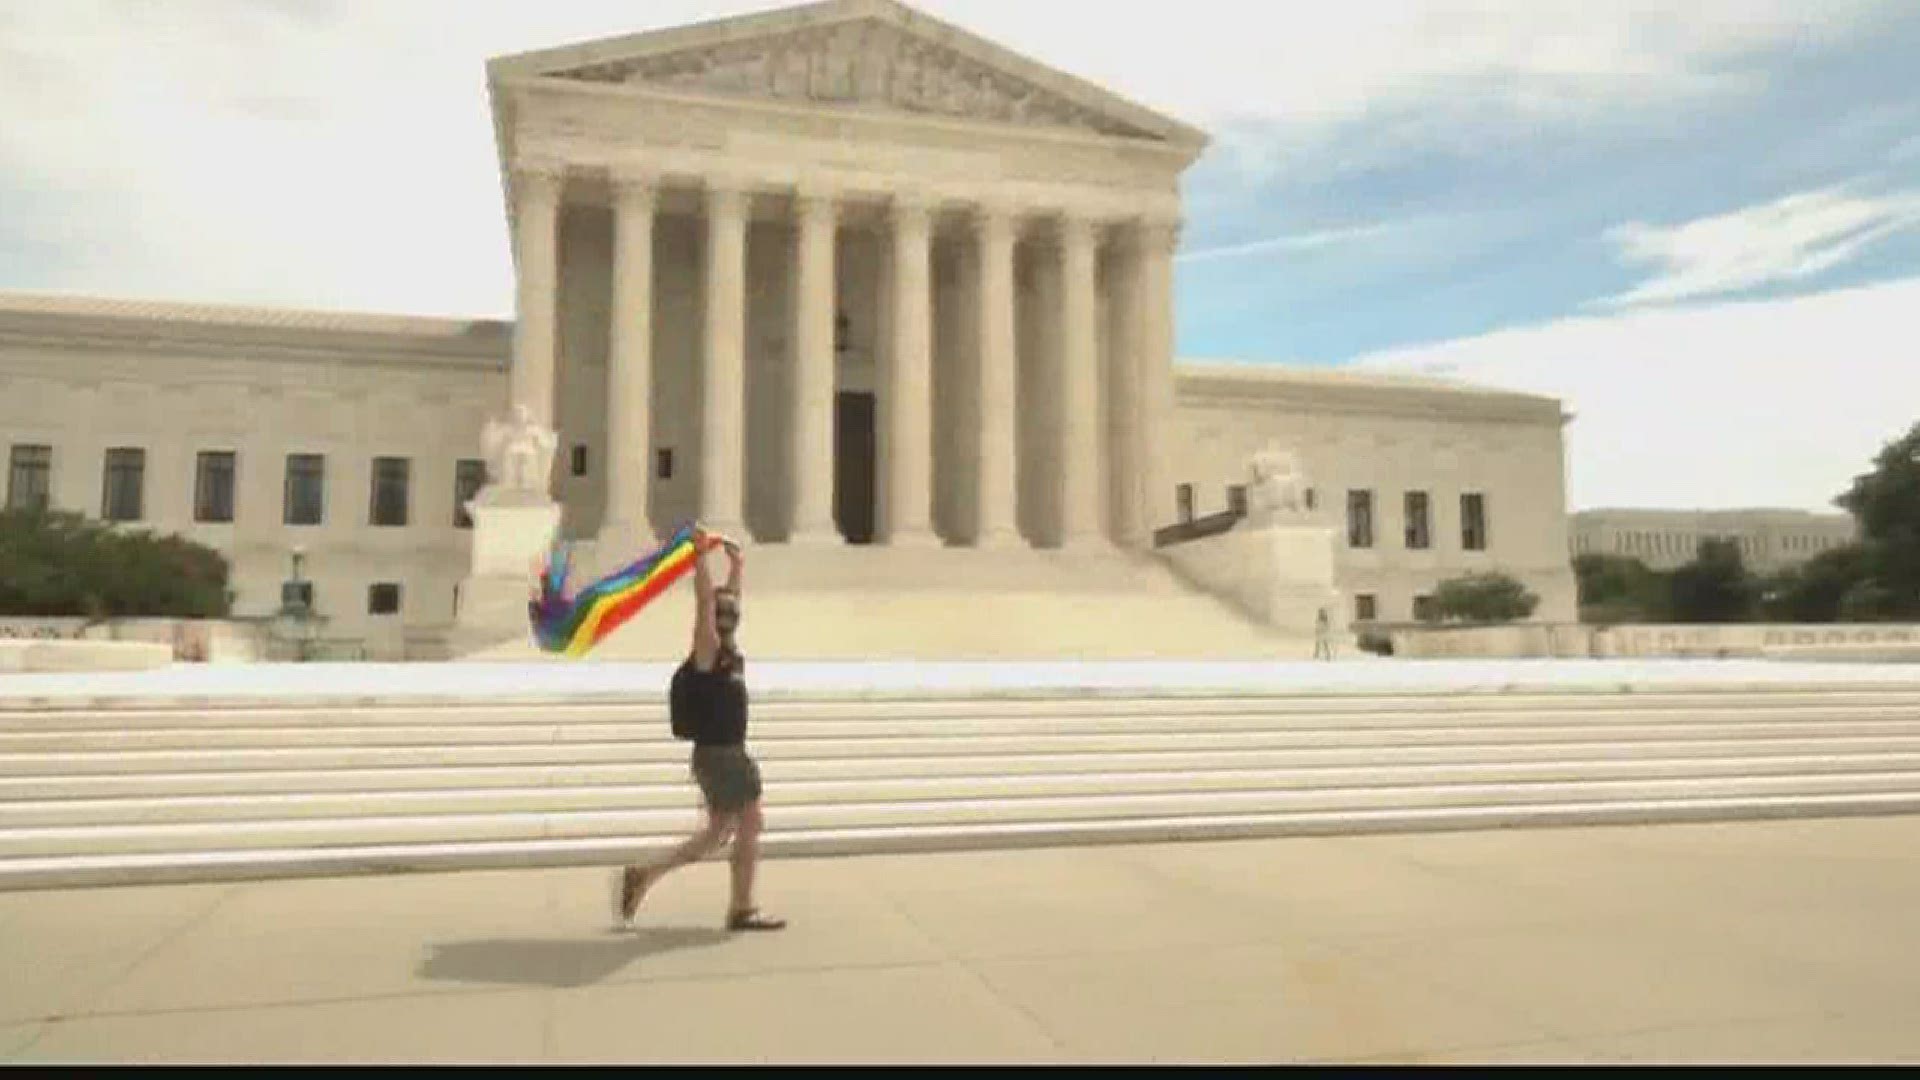 The Supreme Court decided to back workplace rights for gay, lesbian, and transgender people on Monday morning. The ruling was 6 to 3.